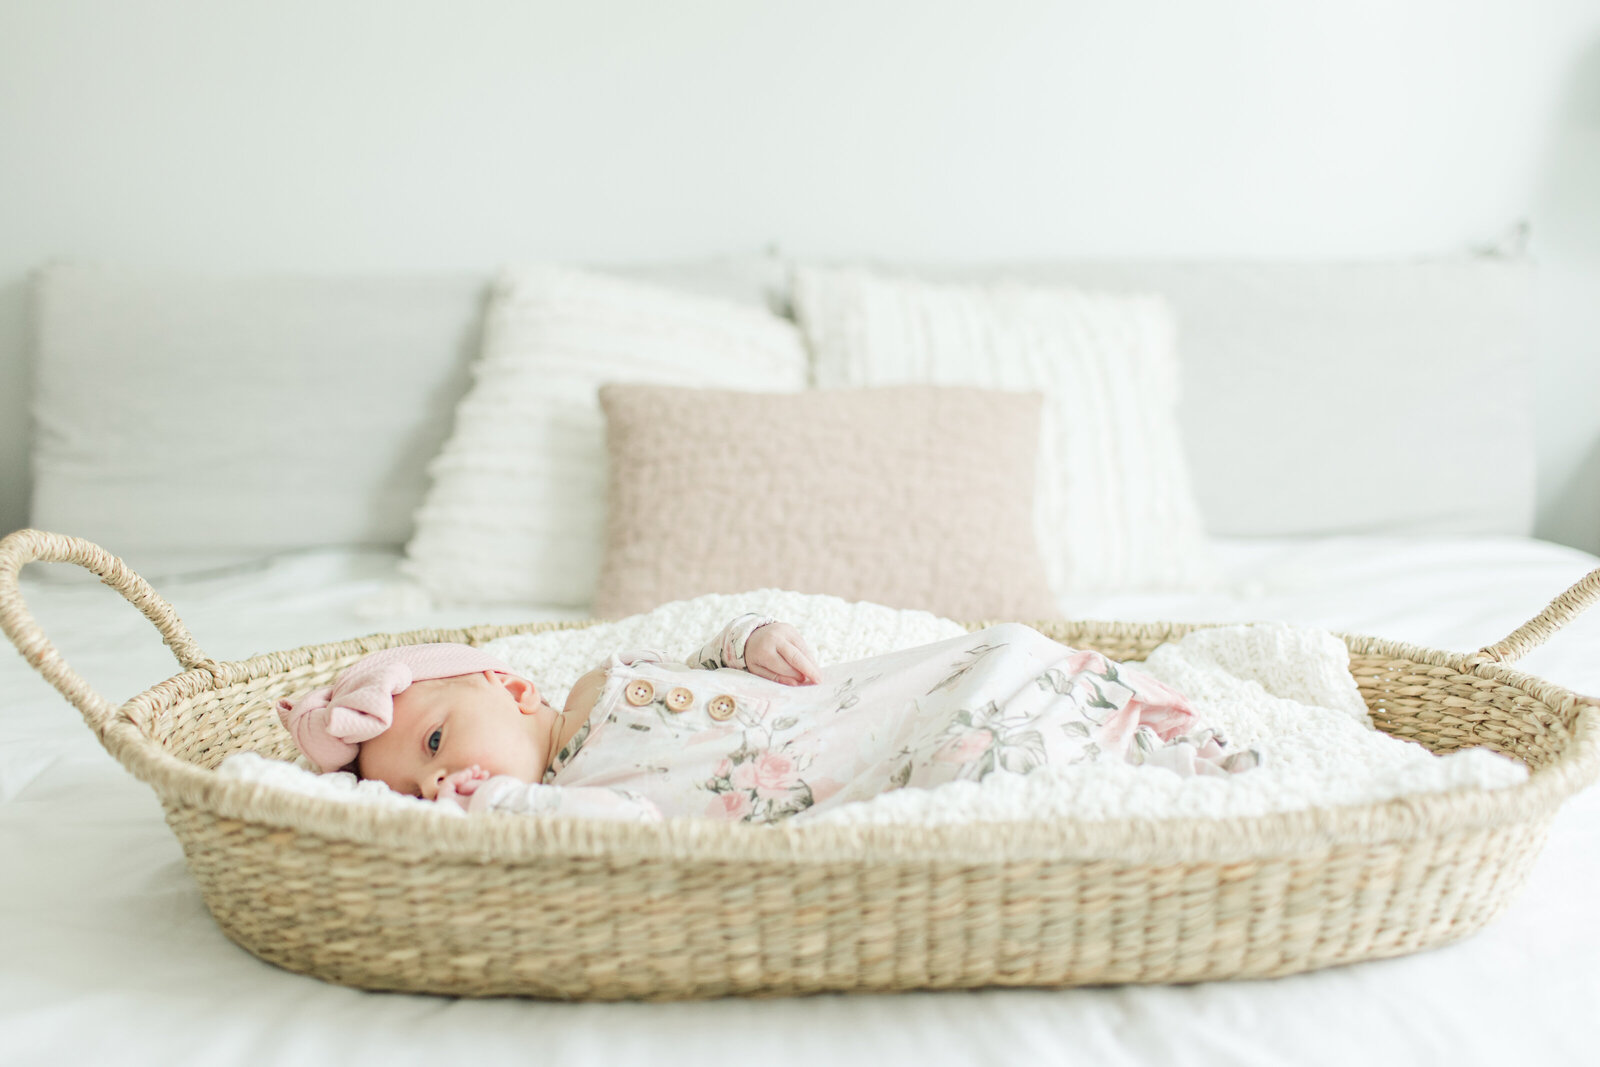 In home wellesley massachusetts newborn photography, bright and airy